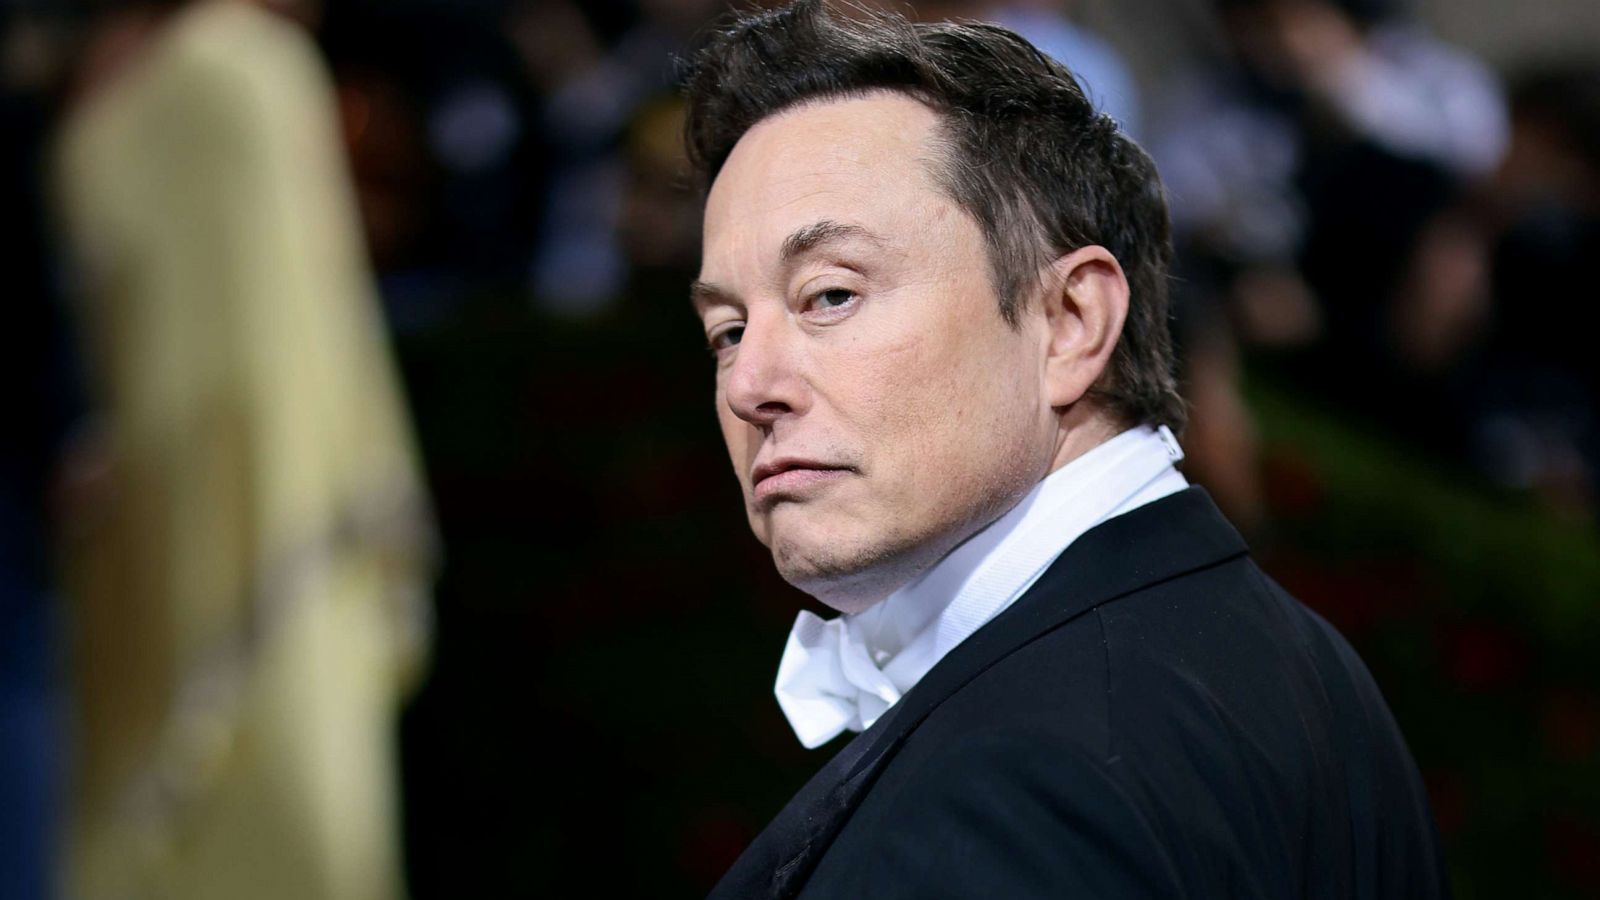 Elon Musk Reportedly Bought Twitter After Disagreement With CEO